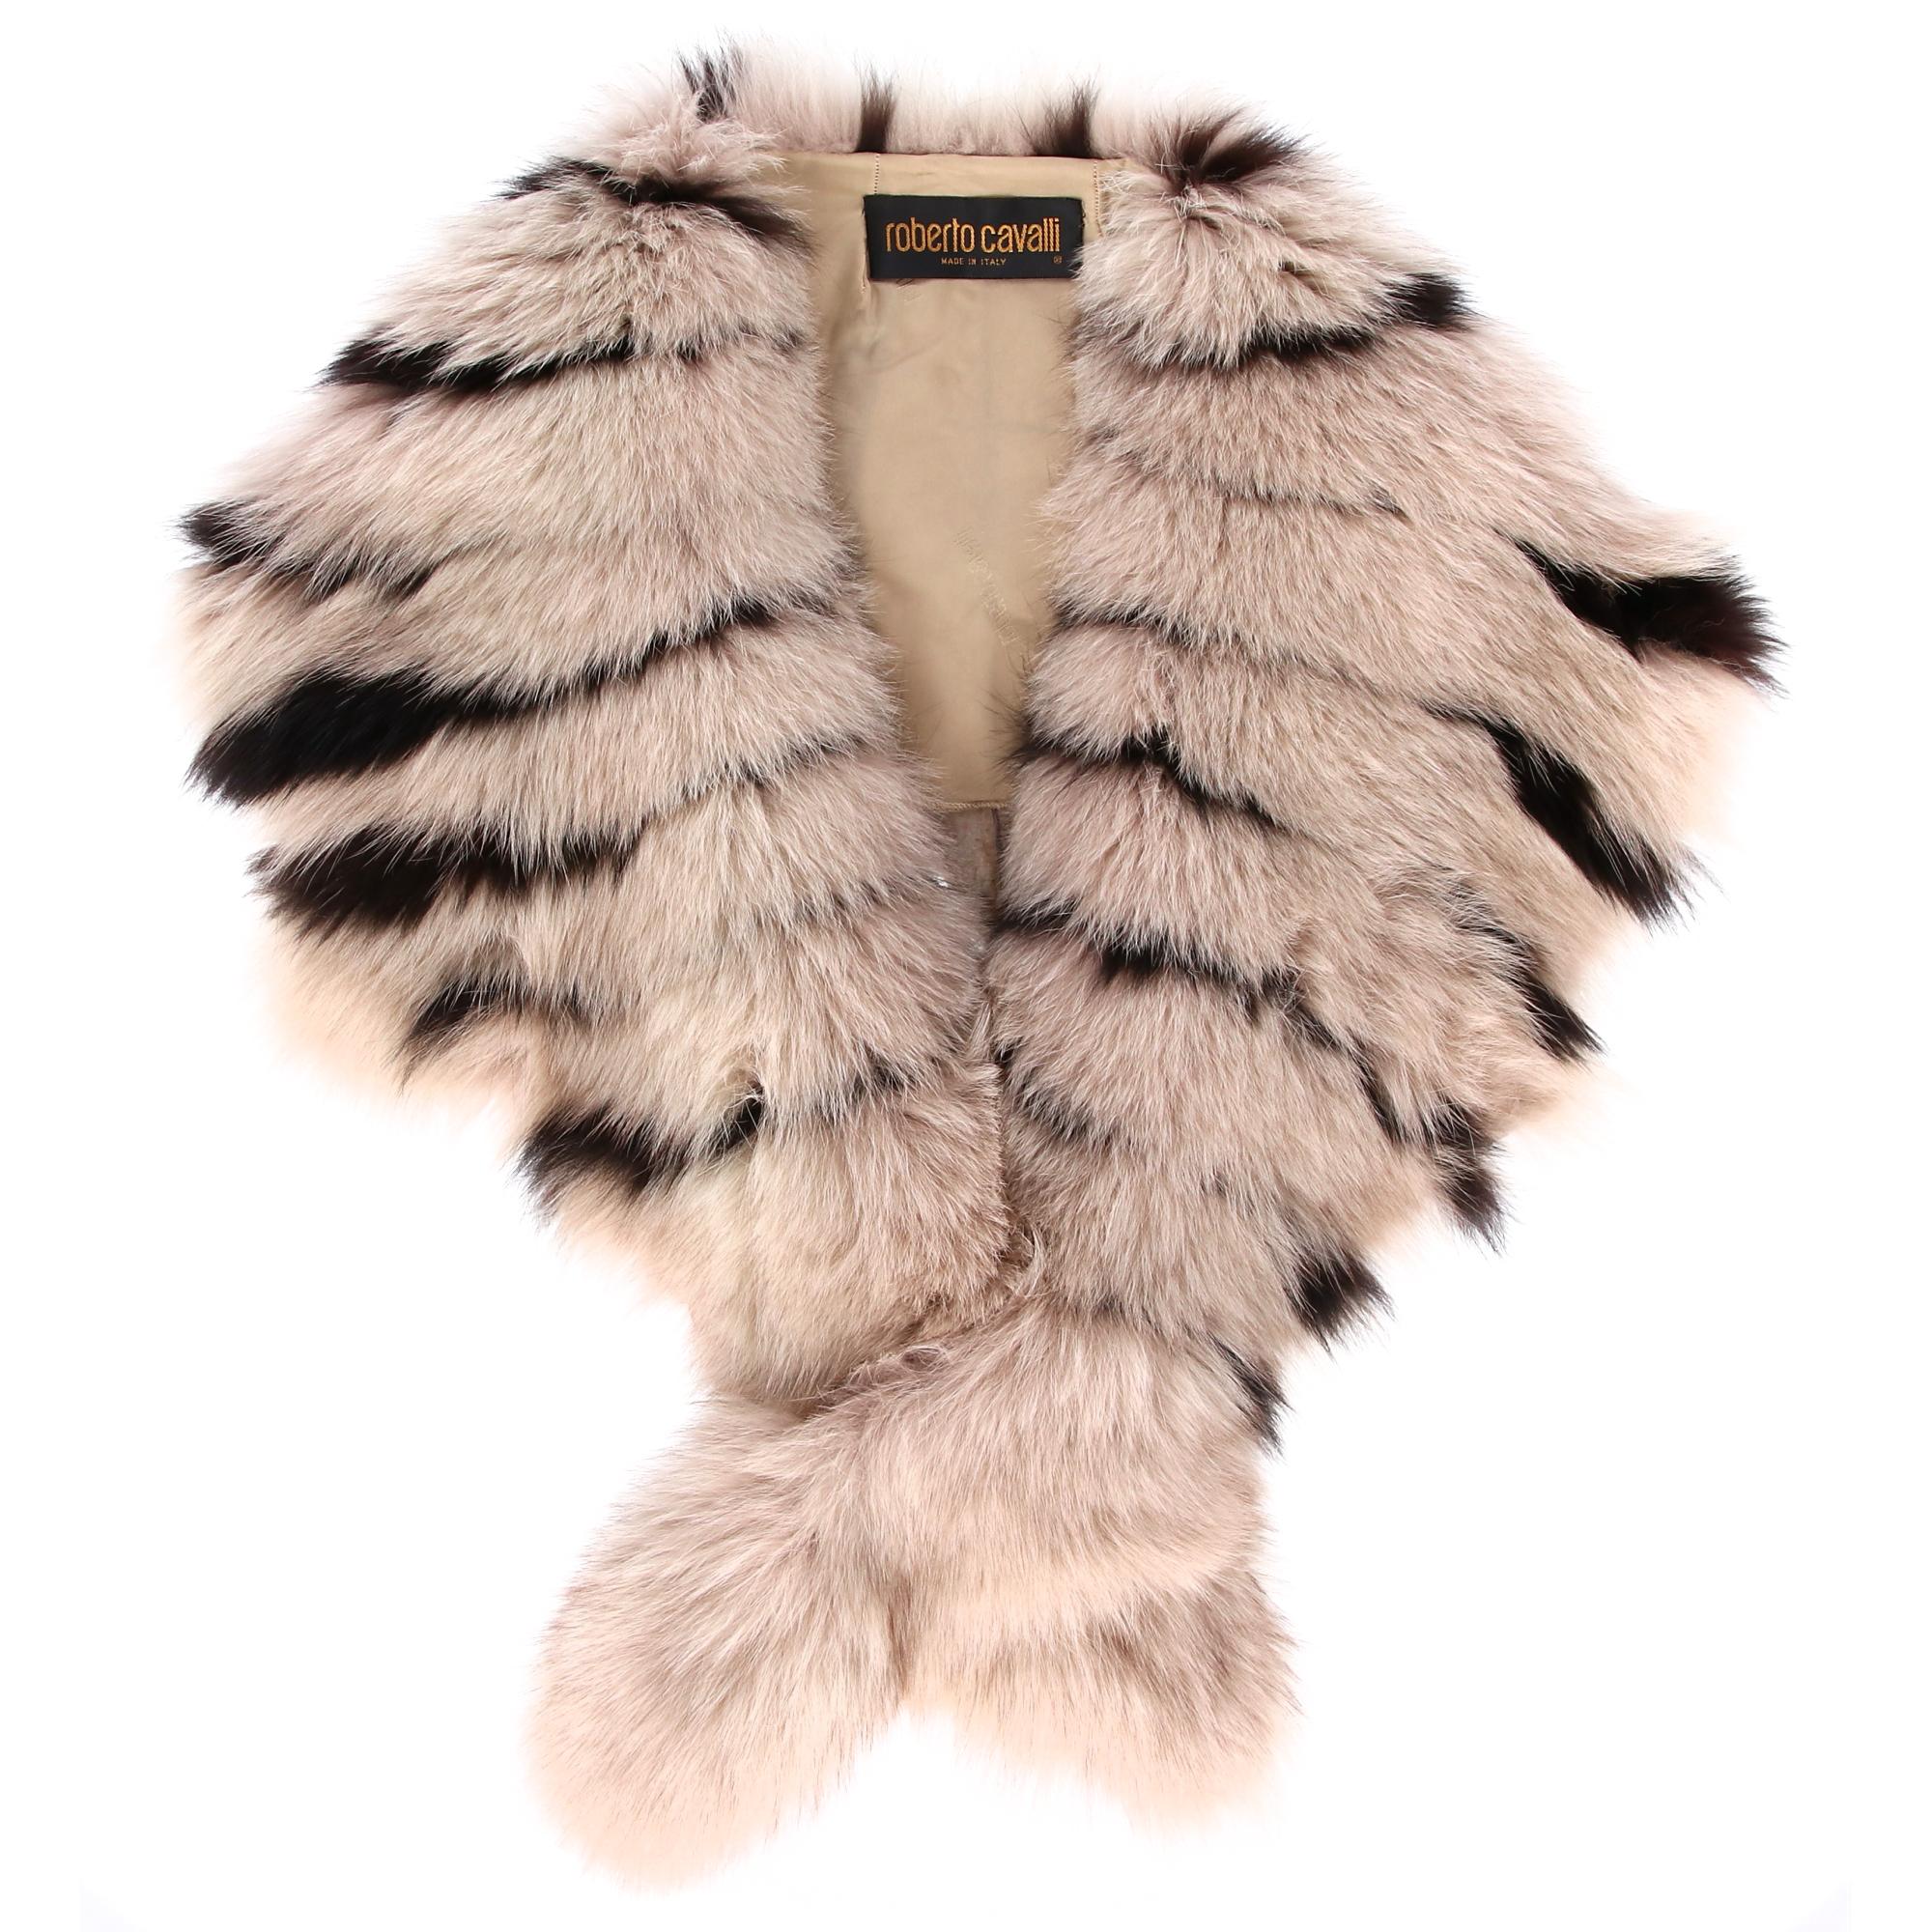 Roberto Cavalli scarf in real gray fox fur with brown stripes, lined with logoed beige synthetic fabric, interlocking closure.

Please note this item cannot be shipped outside the European Union.

Years: 90s

Made in Italy

Measurements: 23,5 cm x